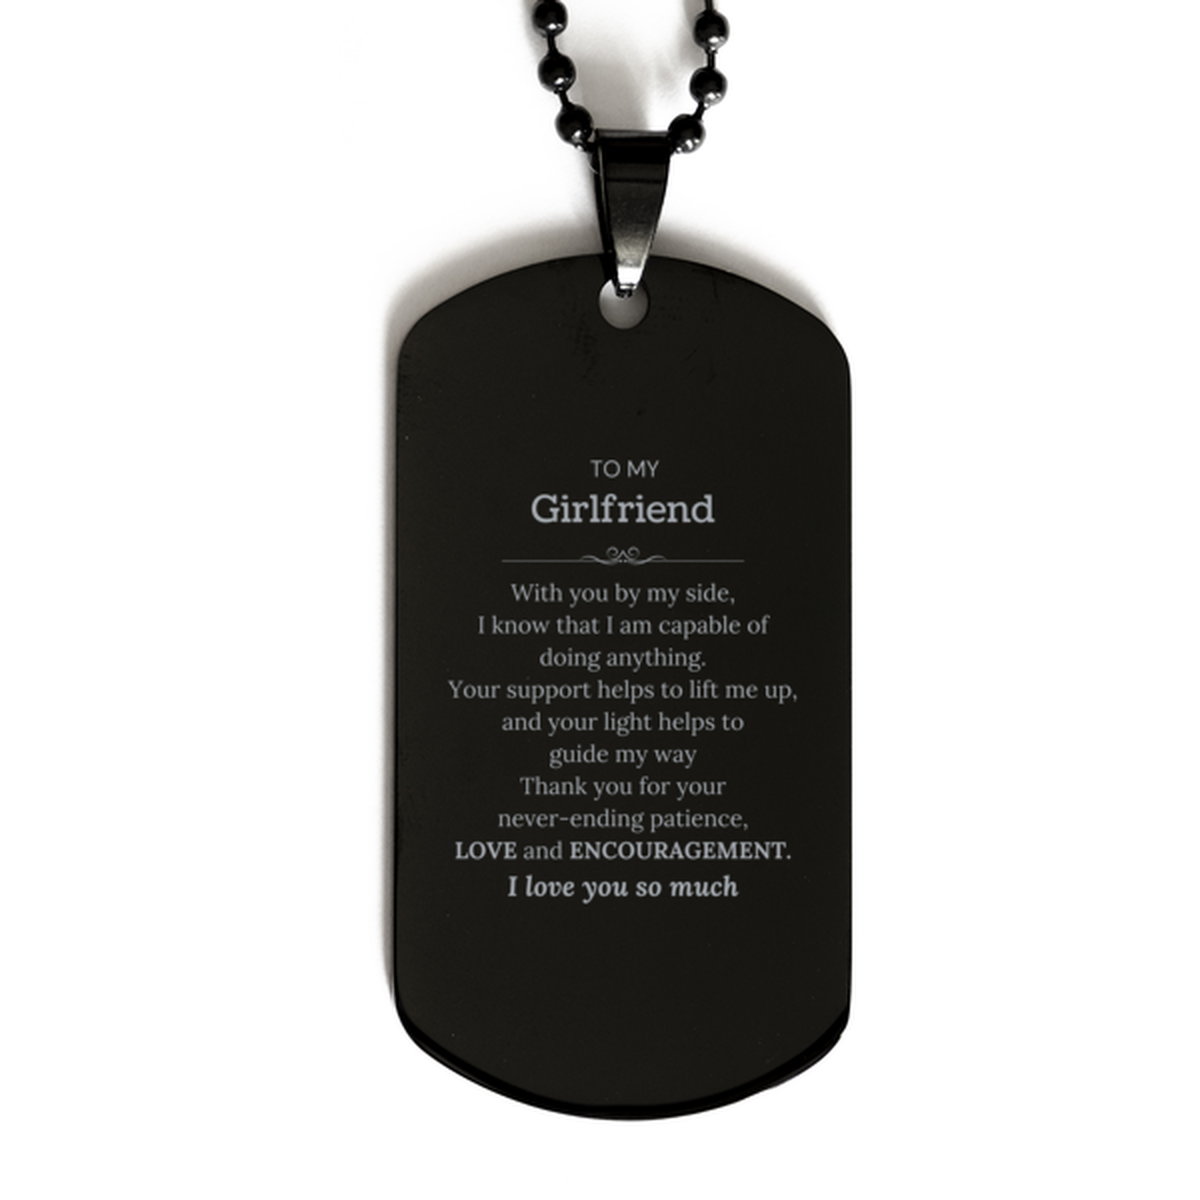 Appreciation Girlfriend Black Dog Tag Gifts, To My Girlfriend Birthday Christmas Wedding Keepsake Gifts for Girlfriend With you by my side, I know that I am capable of doing anything. I love you so much